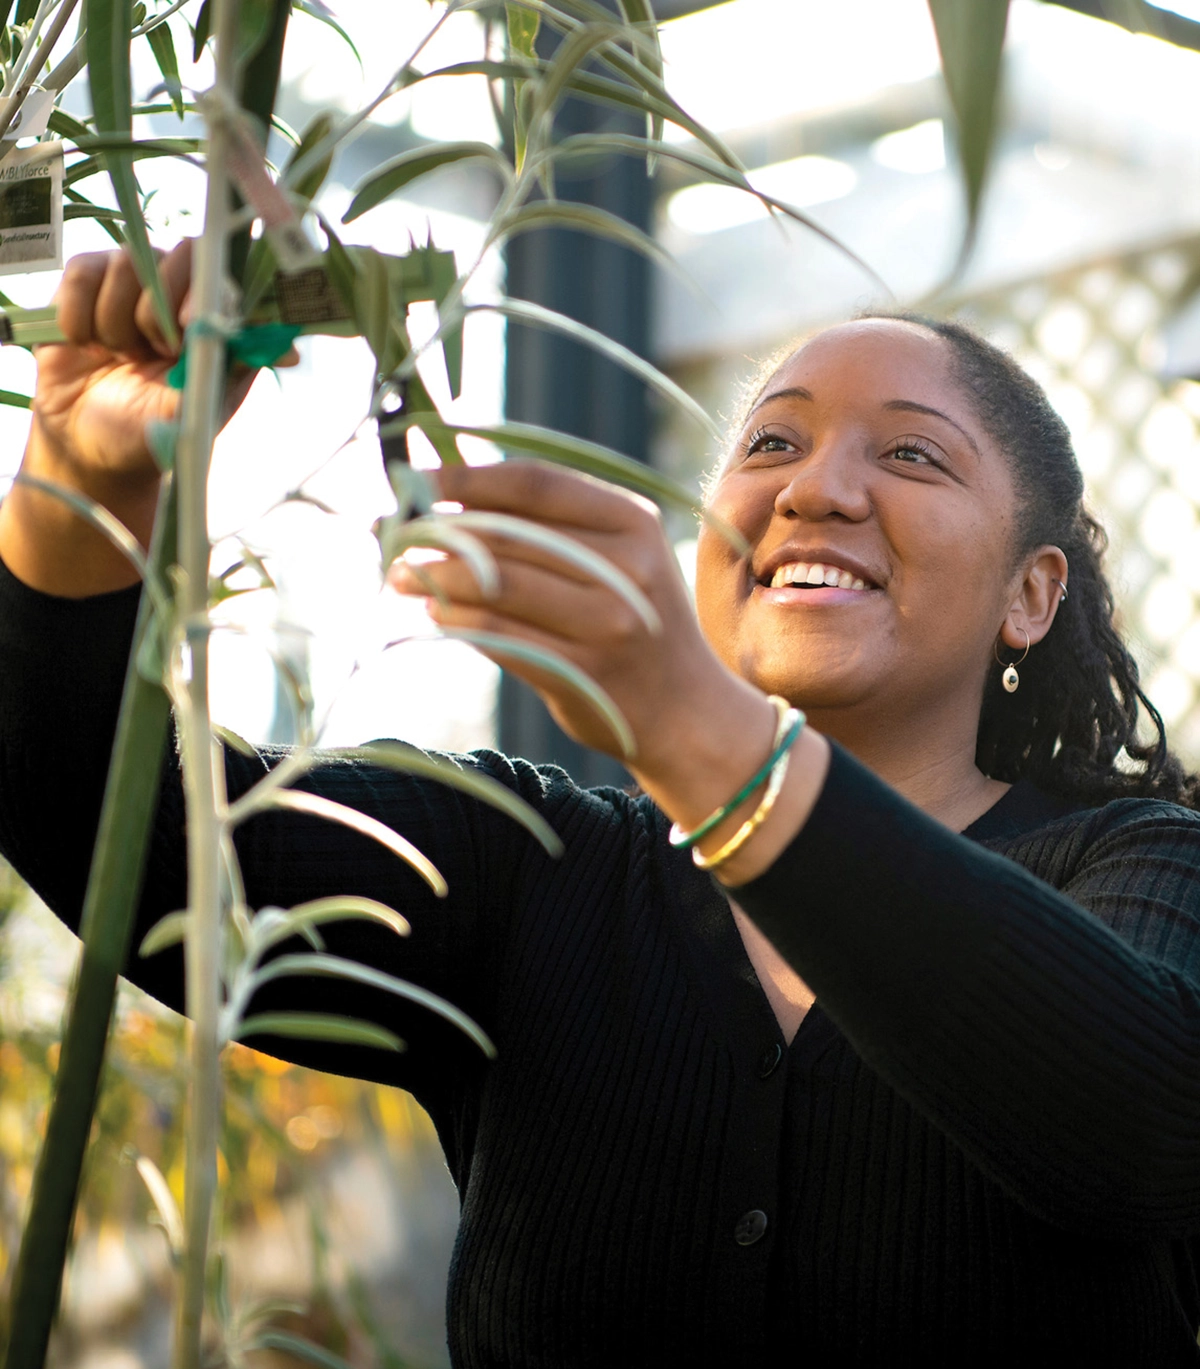 Post-doctoral Fellow Tanisha Williams cared for the plant specimens, grown from seeds, in the Rooke Science Center greenhouse.